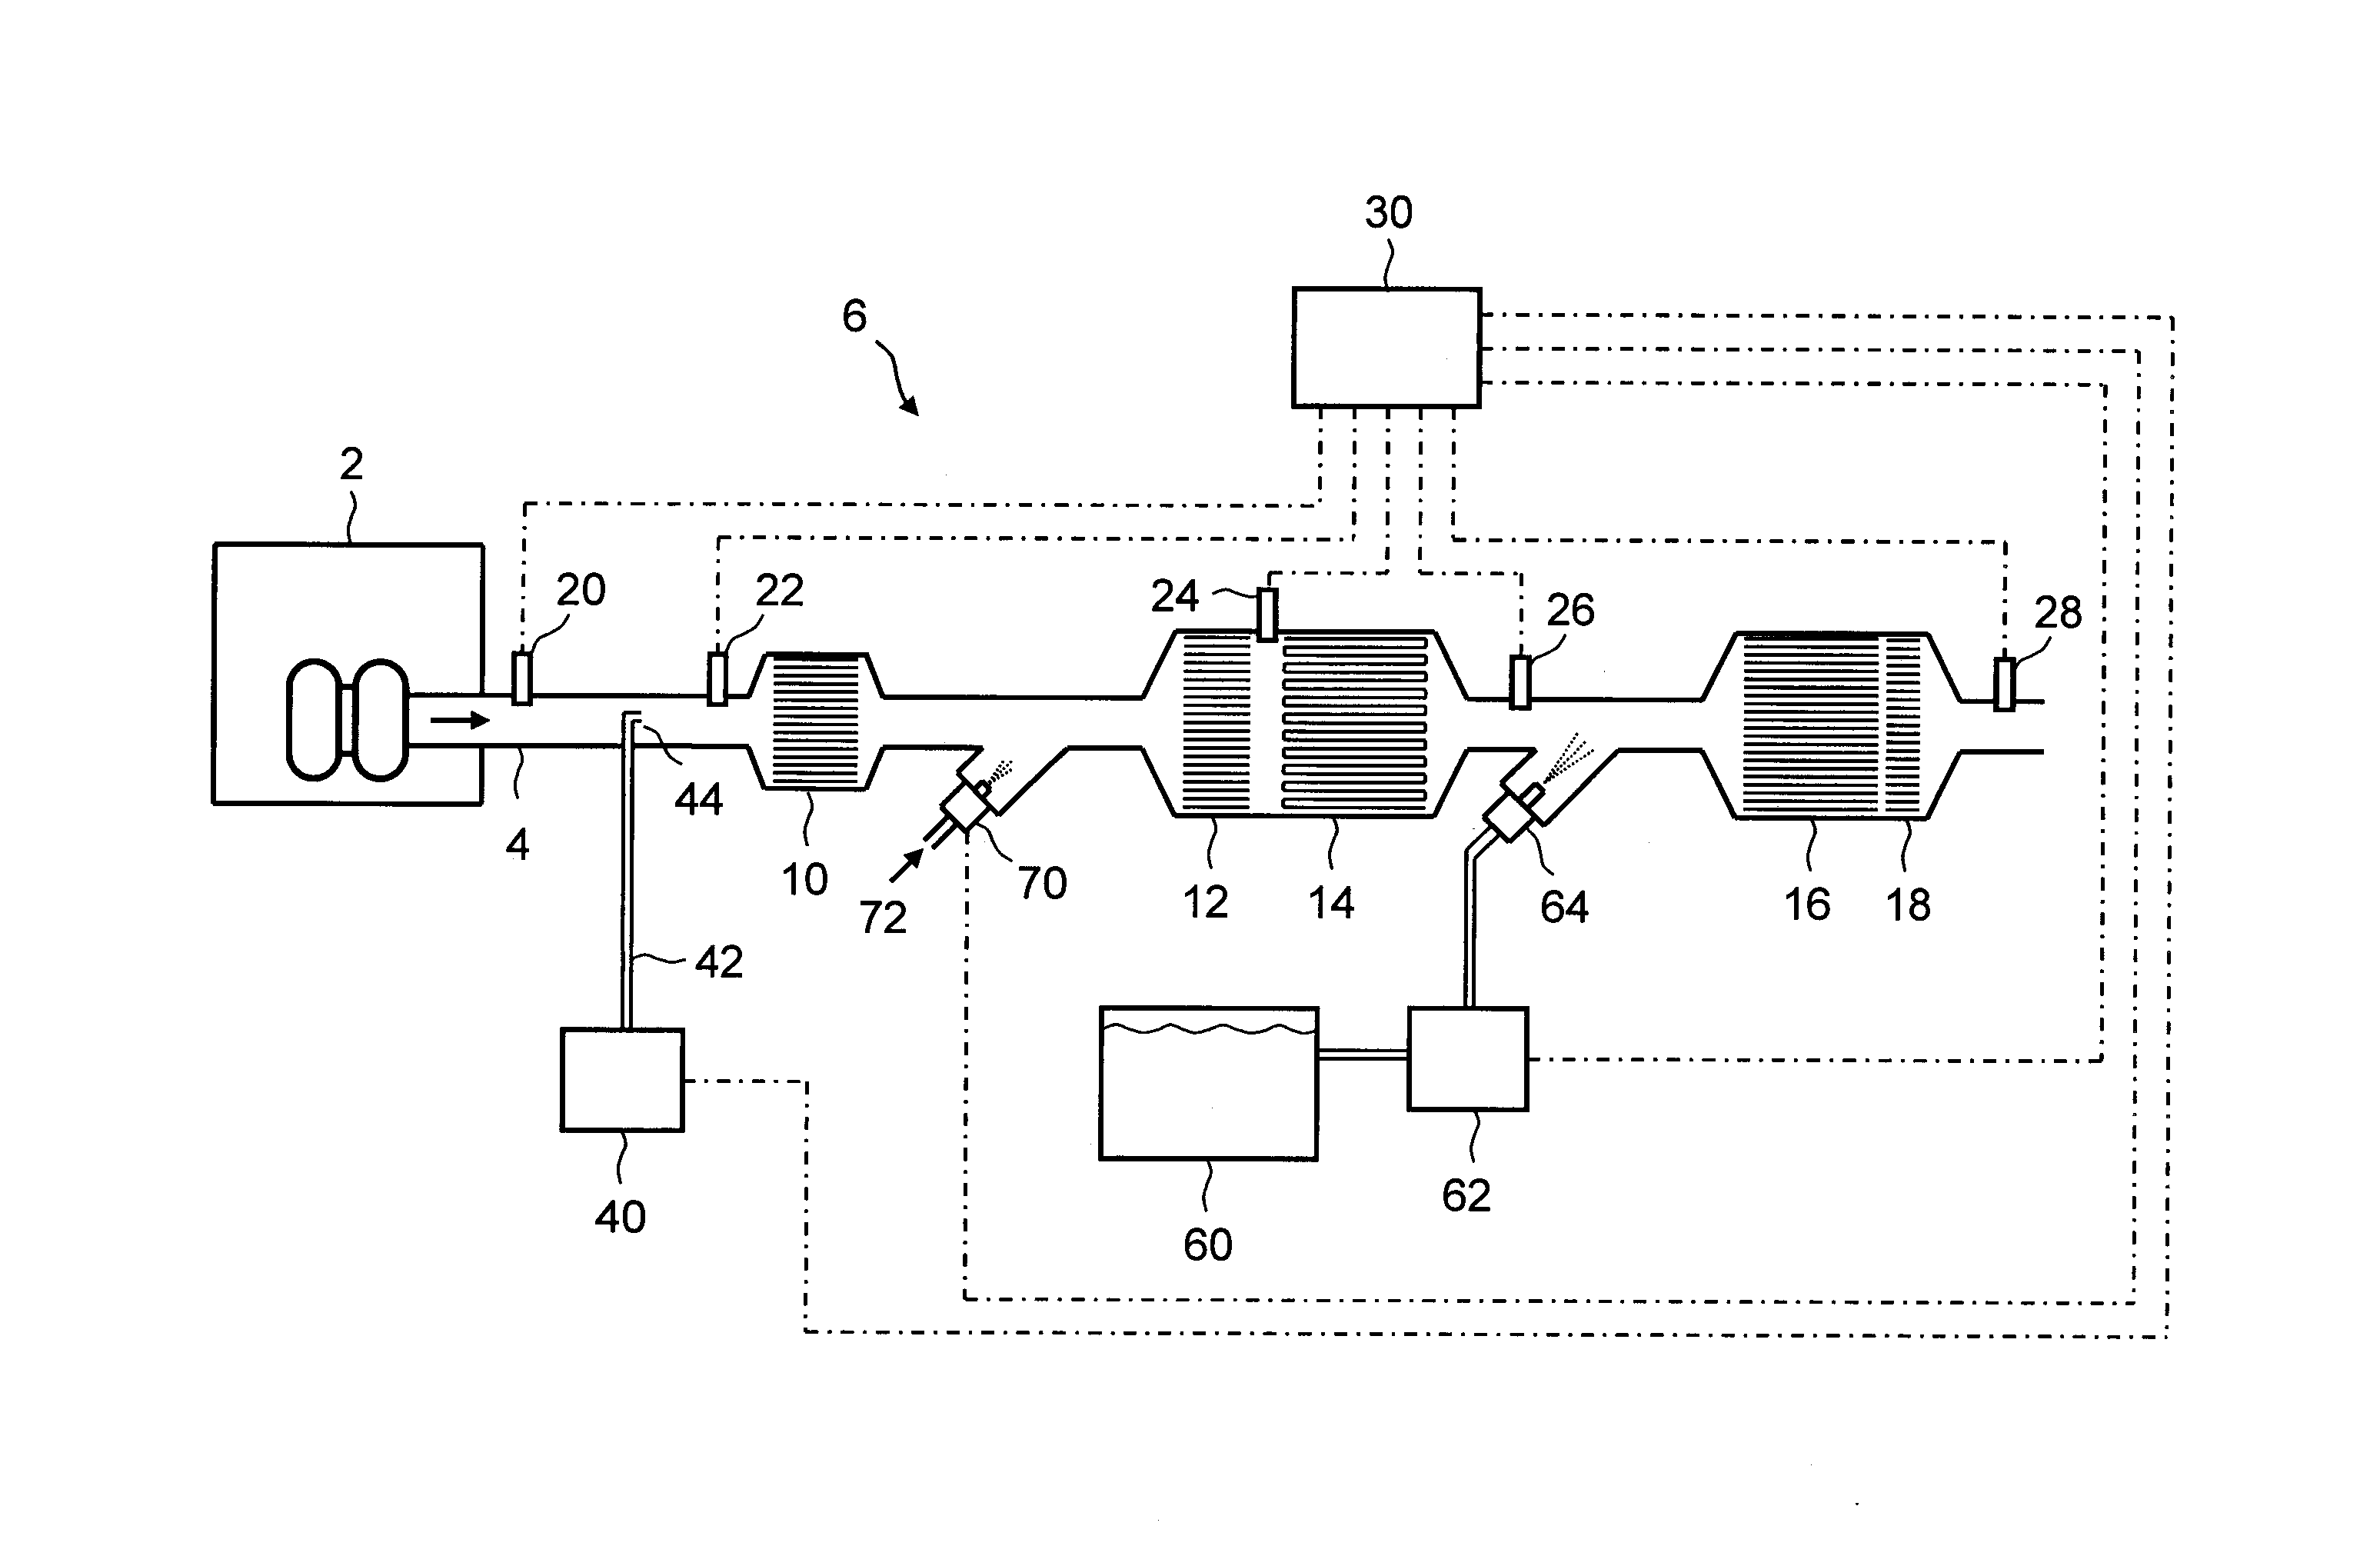 Exhaust aftertreatment system and method for operating the system